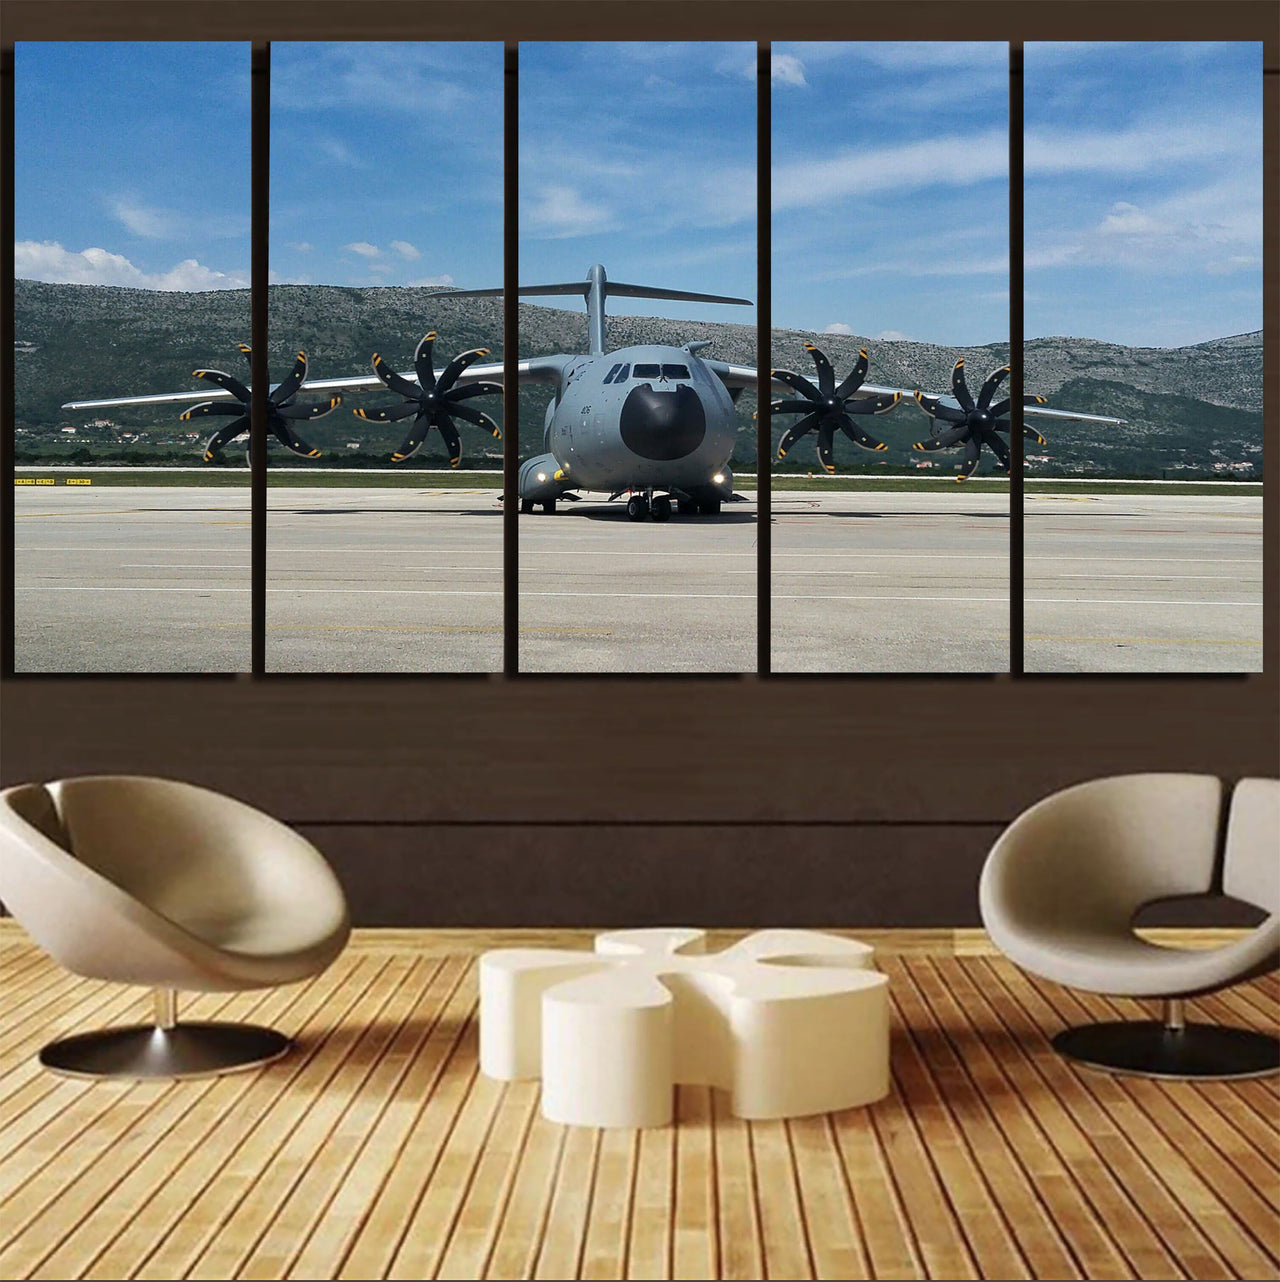 Face to Face with Airbus A400M Printed Canvas Prints (5 Pieces) Aviation Shop 